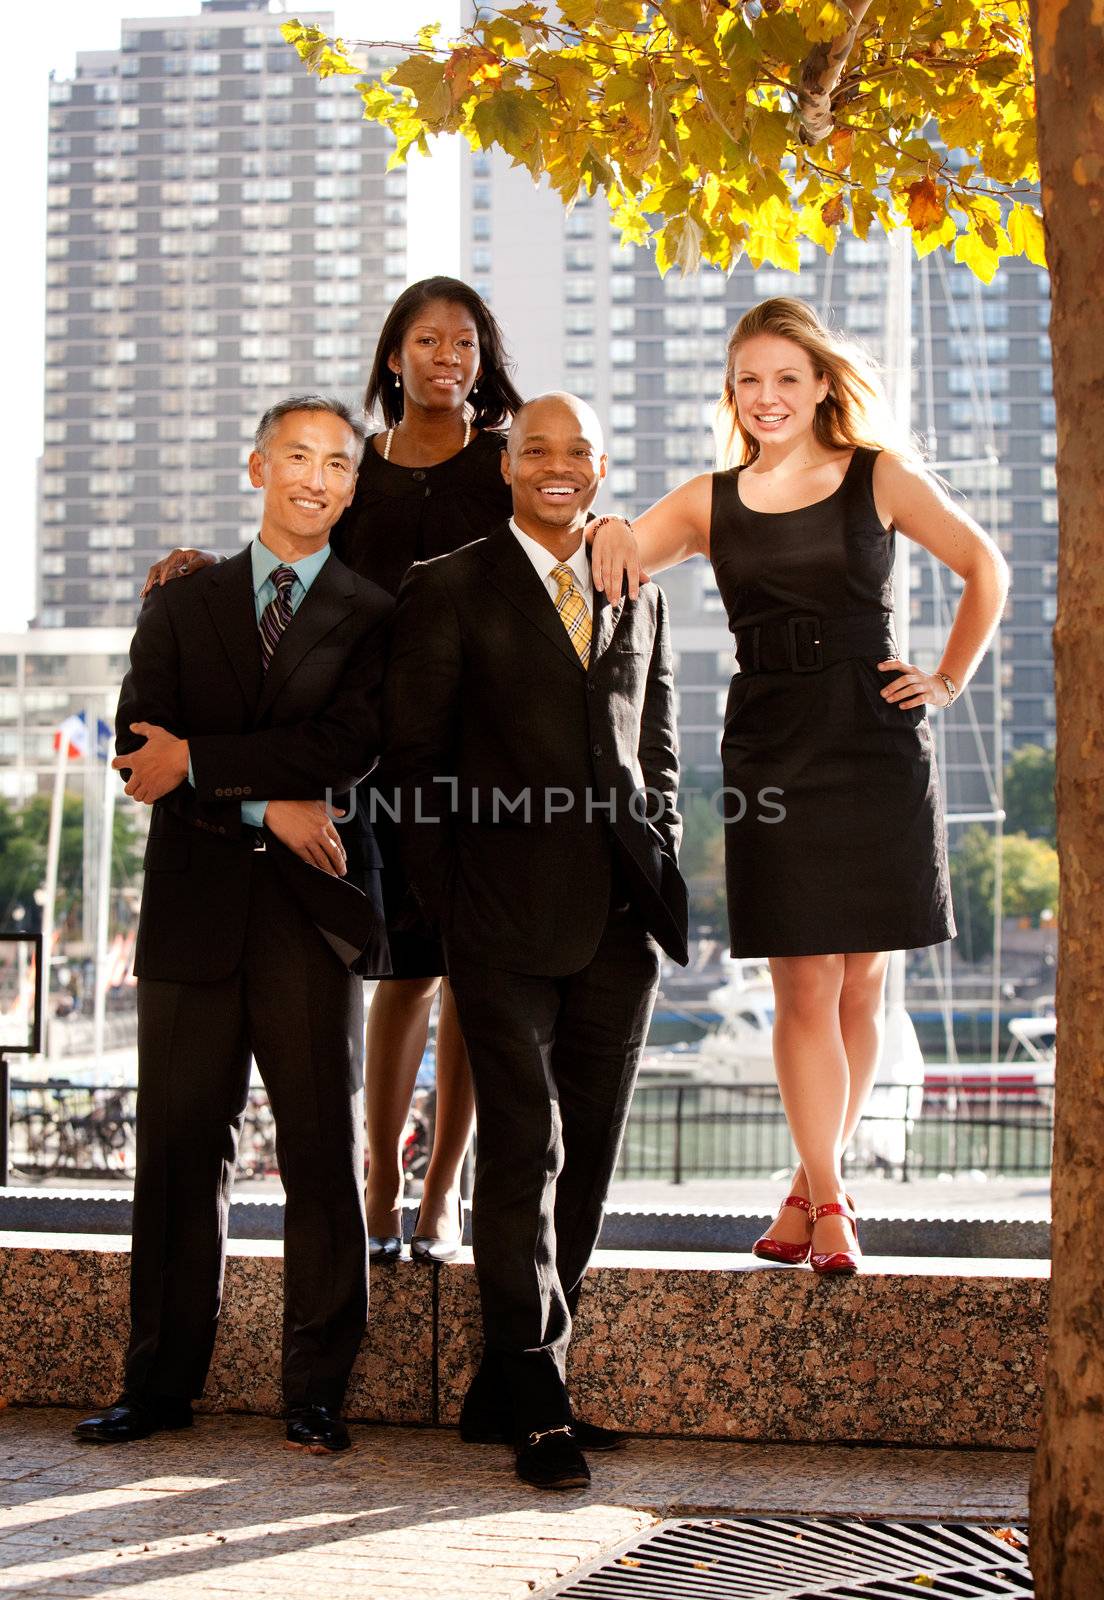 A business team portrait in an outdoor setting